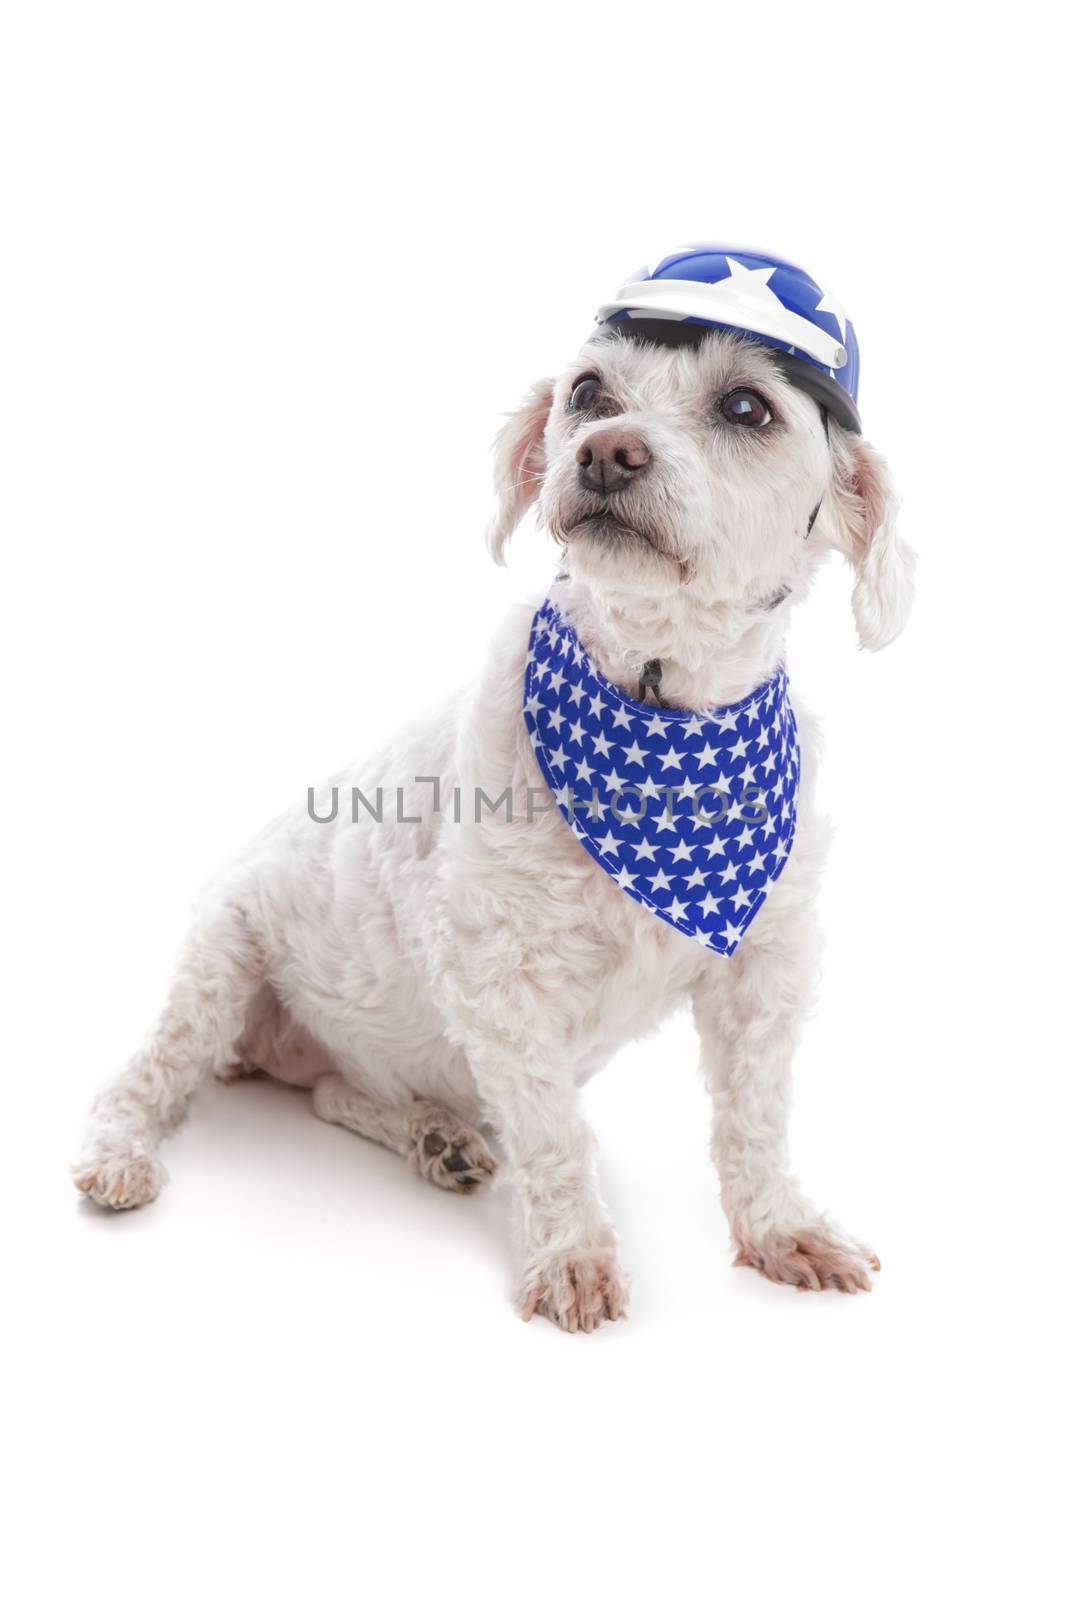 Cute small pet dog wearing a helmet and bandana, sitting against white background.